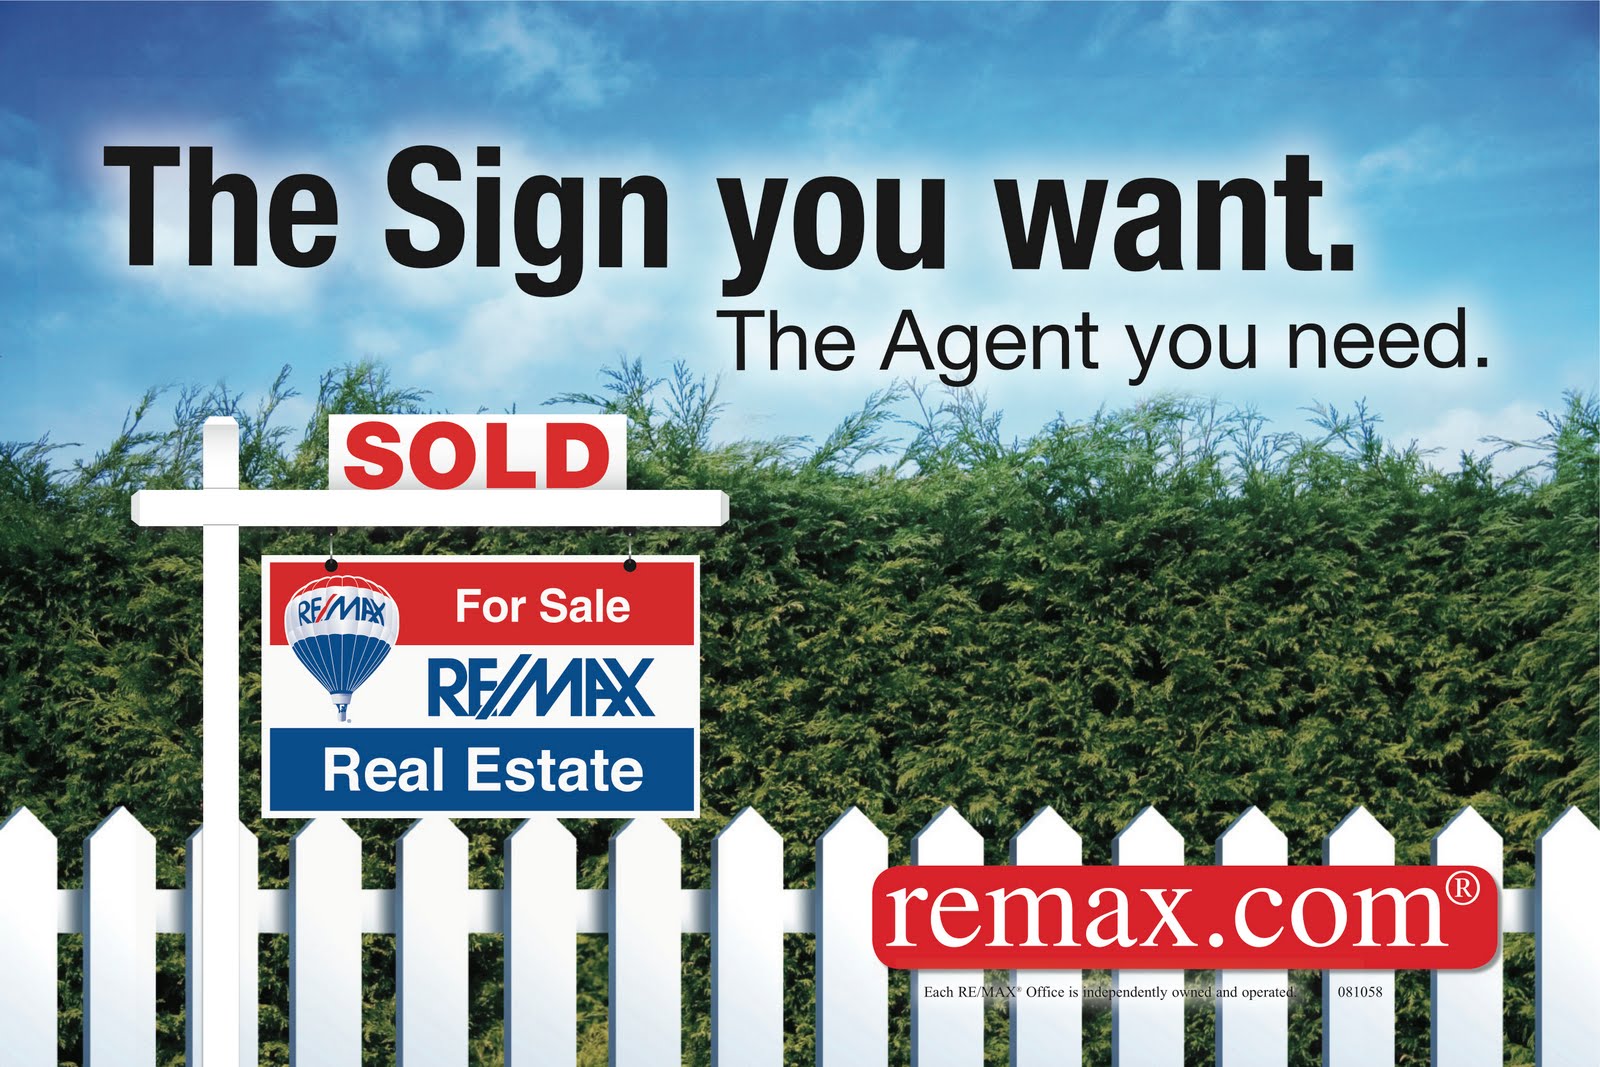 The Sign You Want. Join RE/MAX